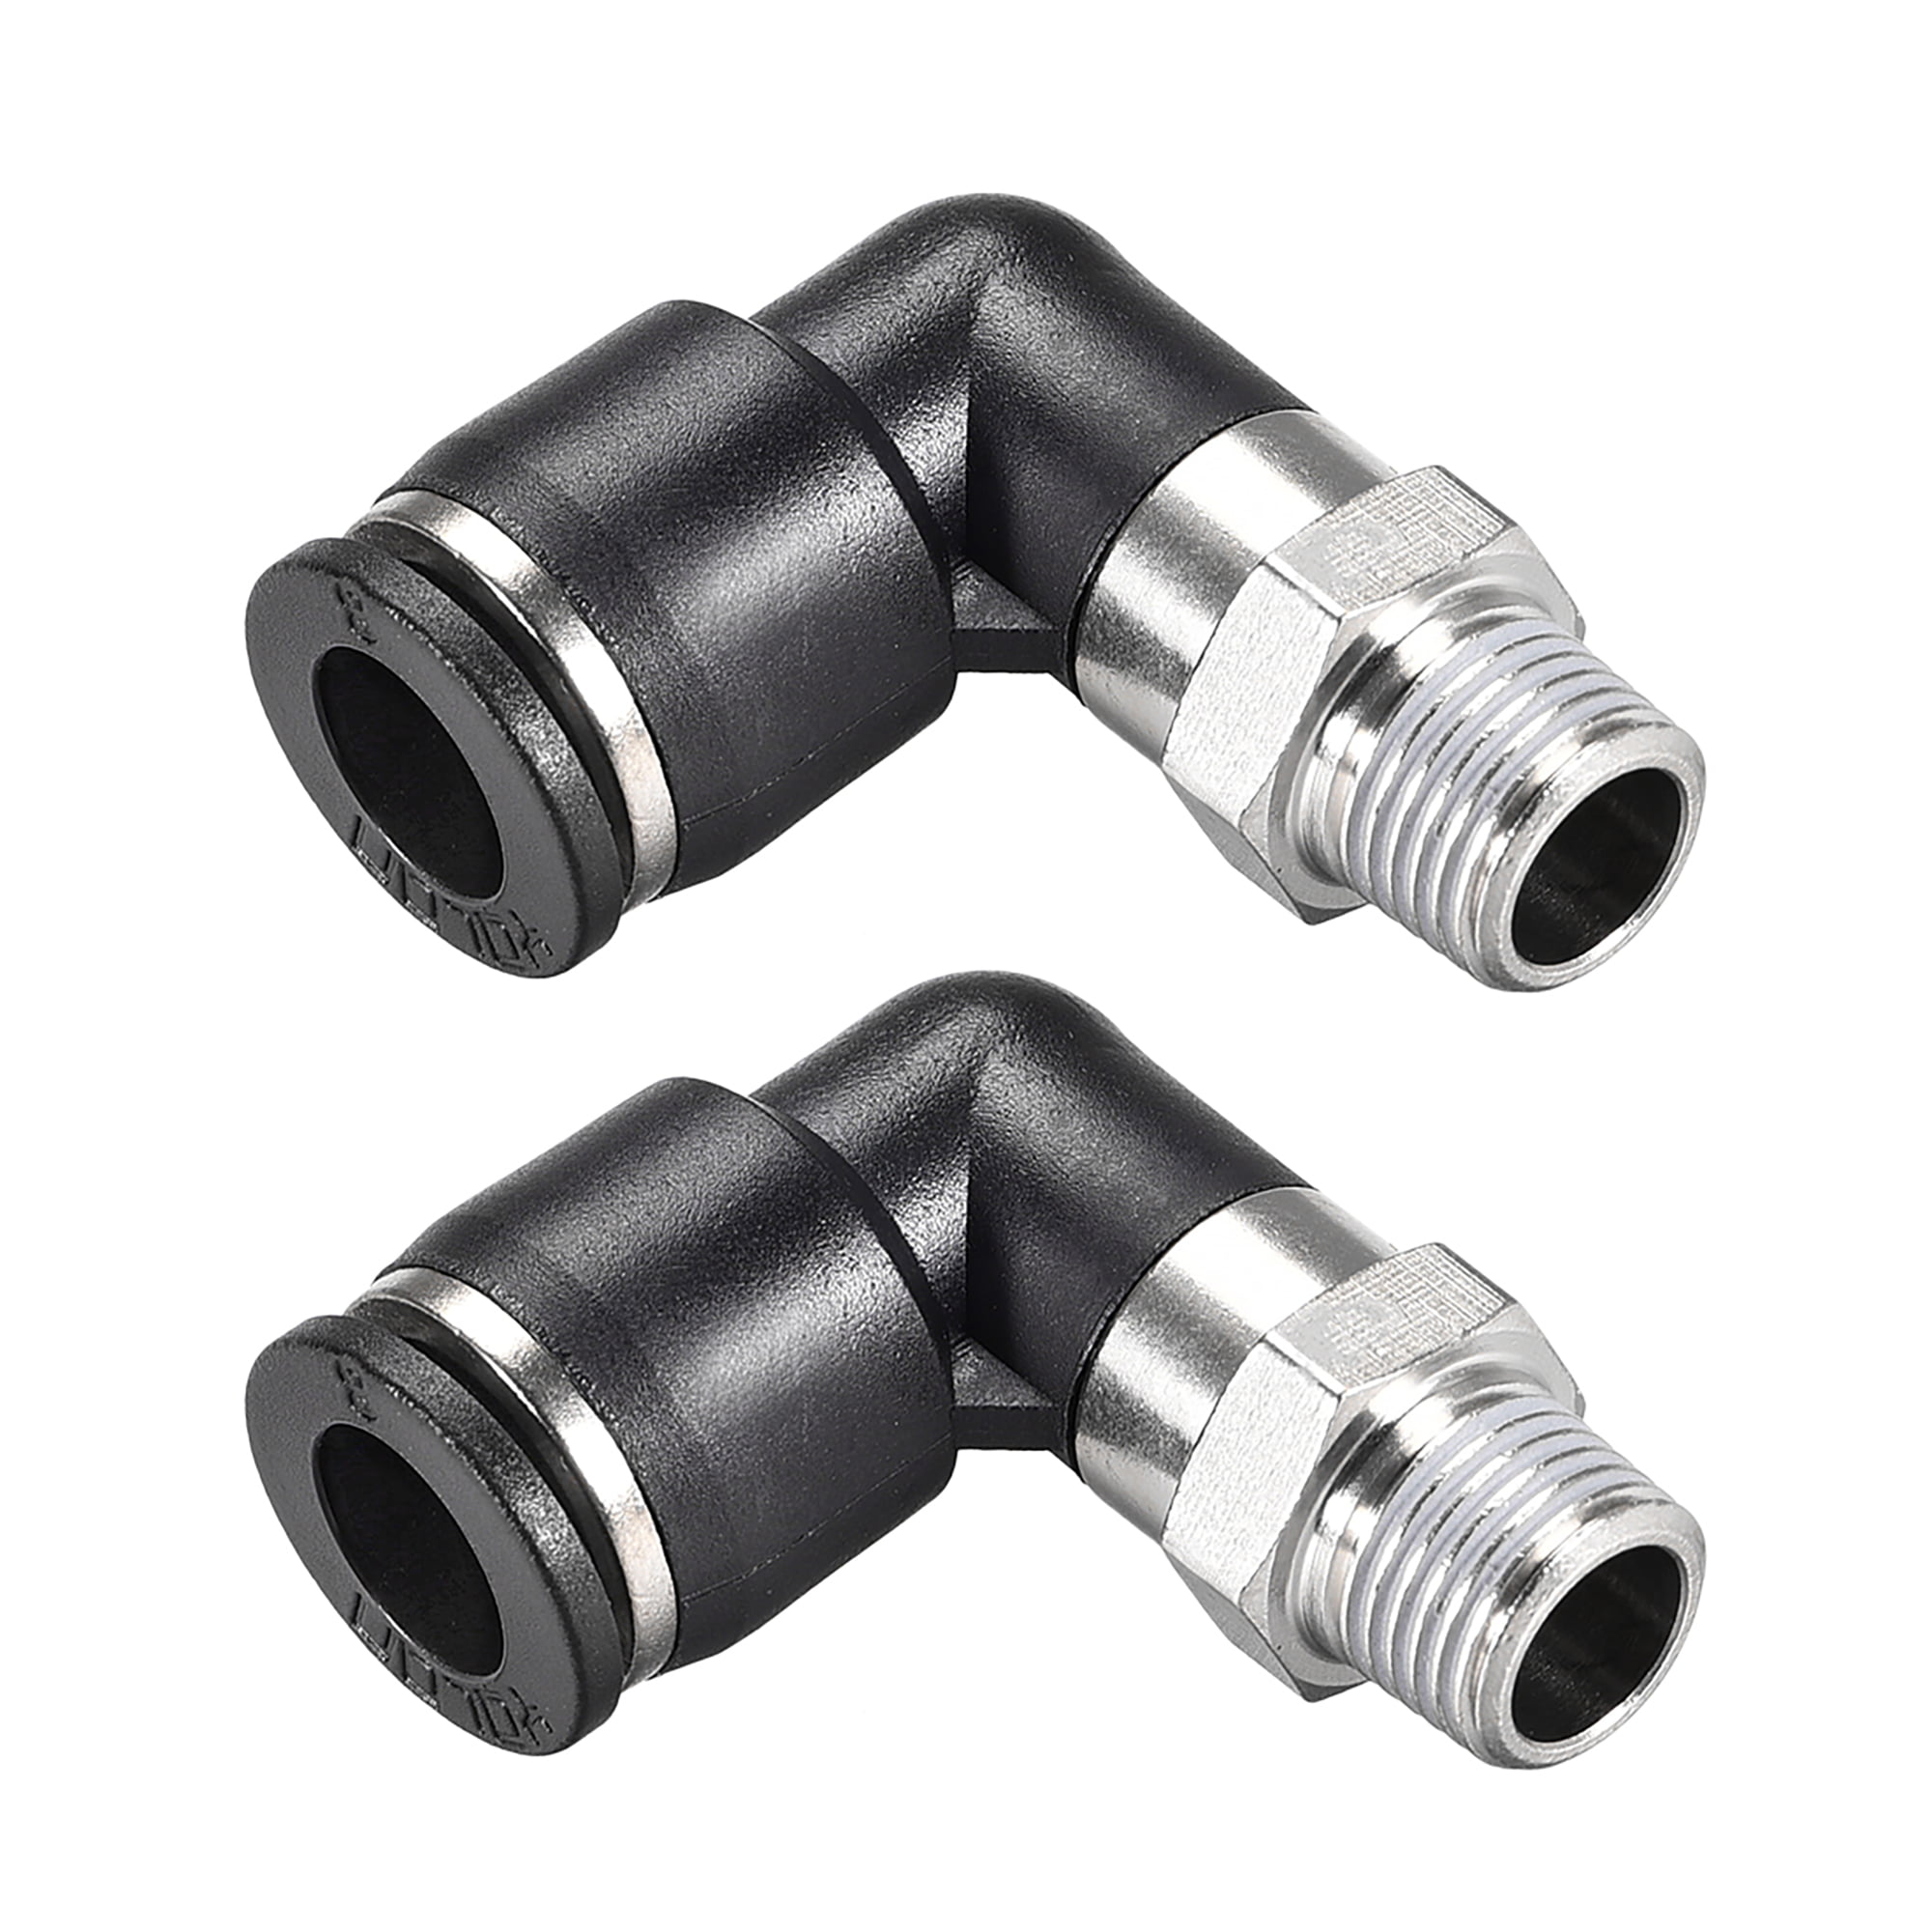 5 New 1/4" OD by 1/8" NPT Male Push to connect tube fittings for Air & Water. 